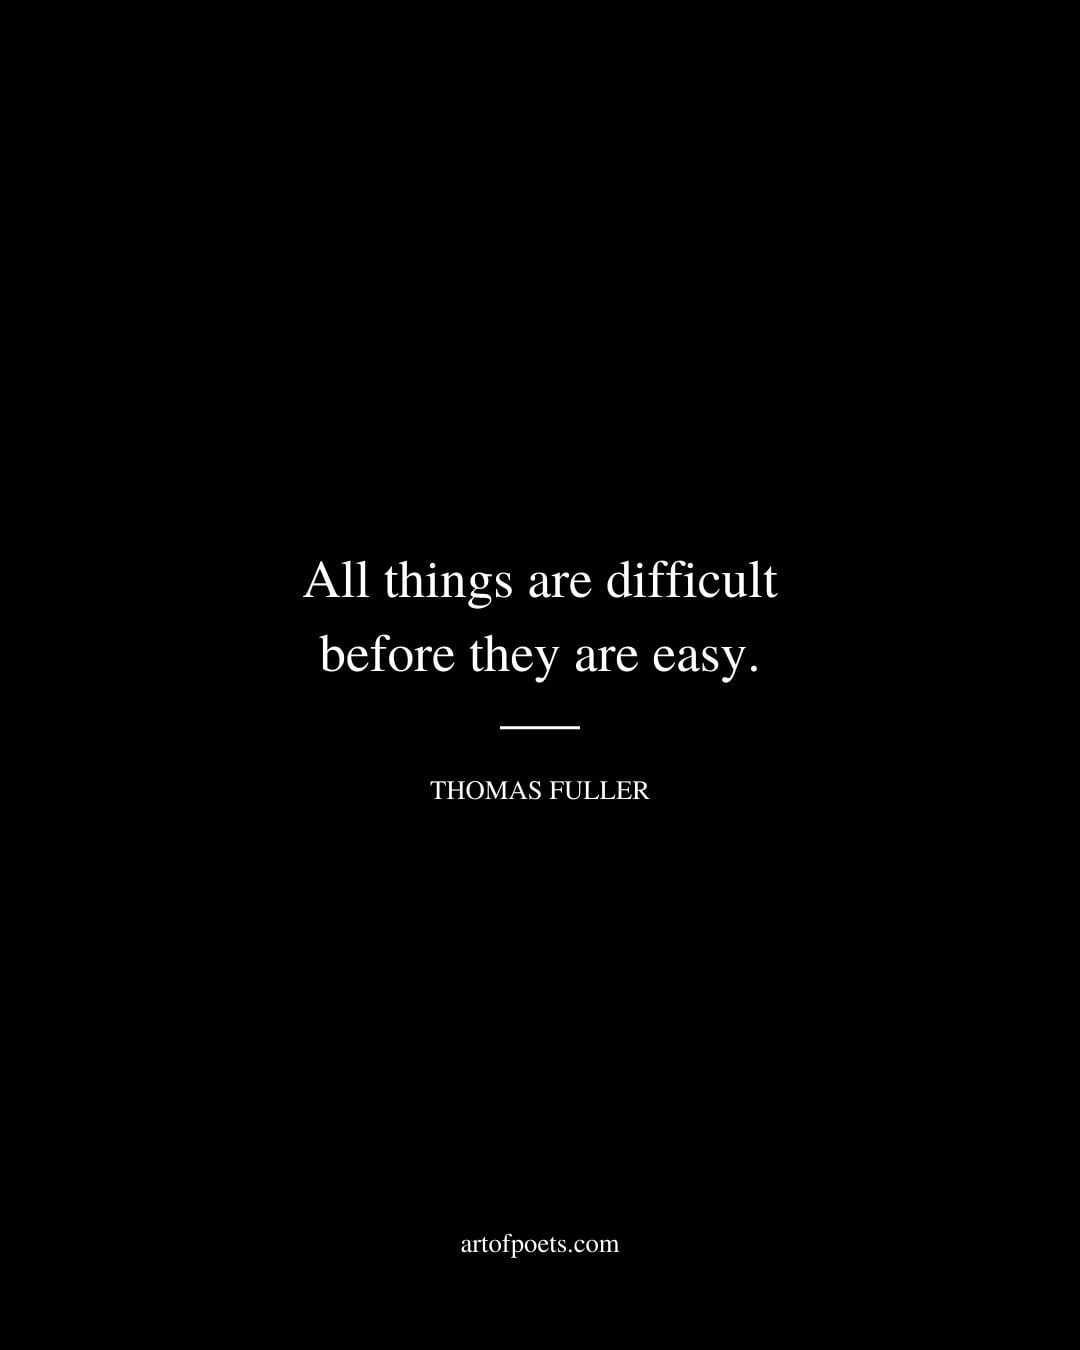 All things are difficult before they are easy. Thomas Fuller